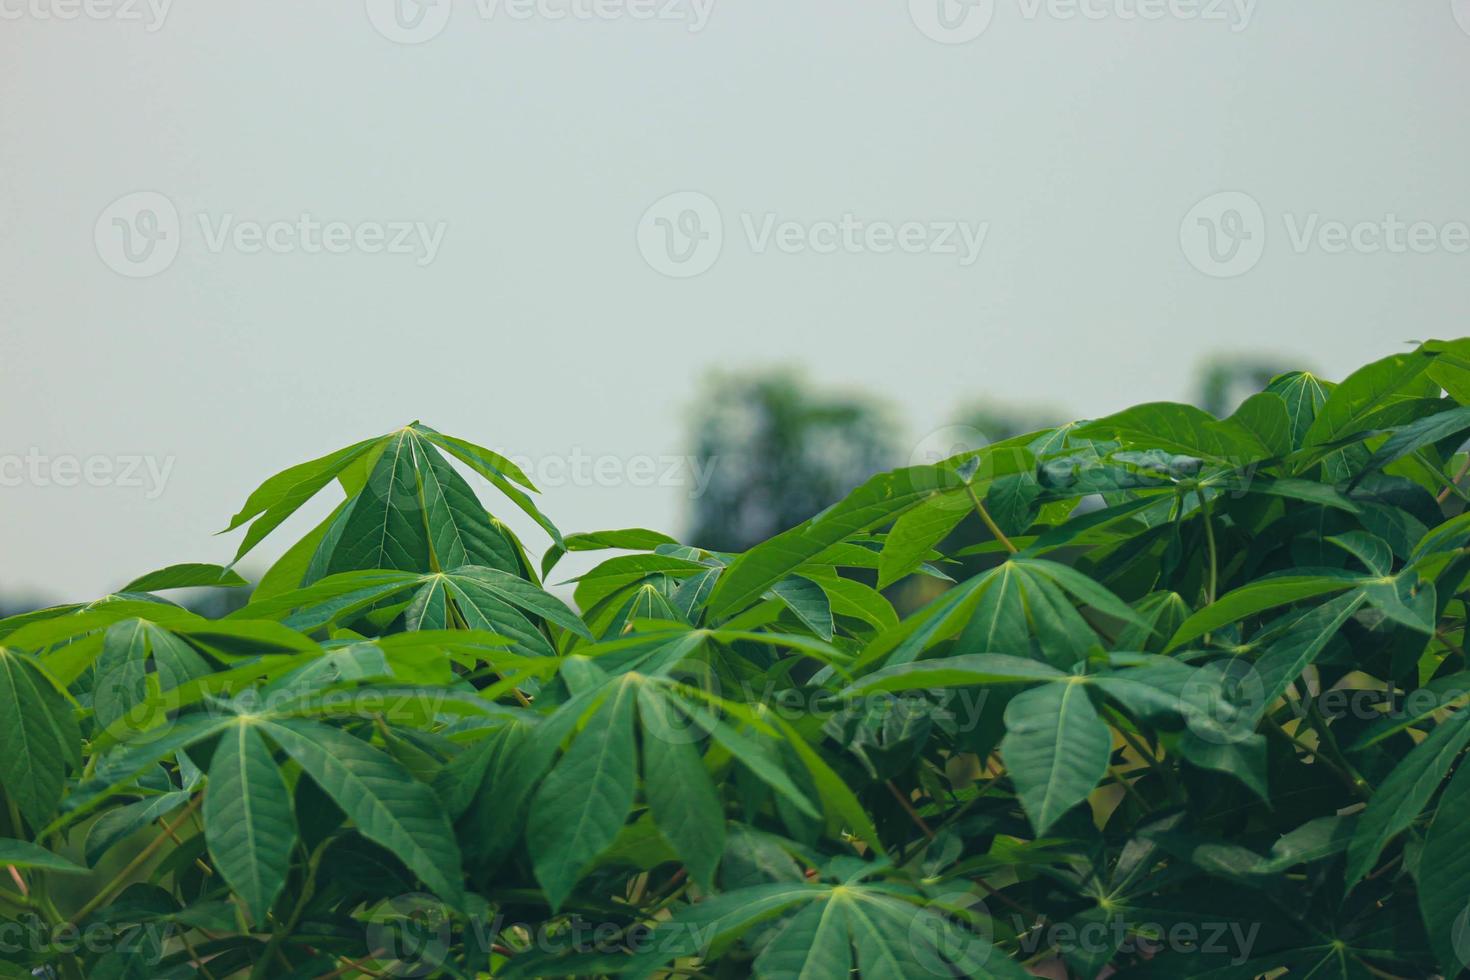 This is a photo of the leaves of a cassava tree that are very lush